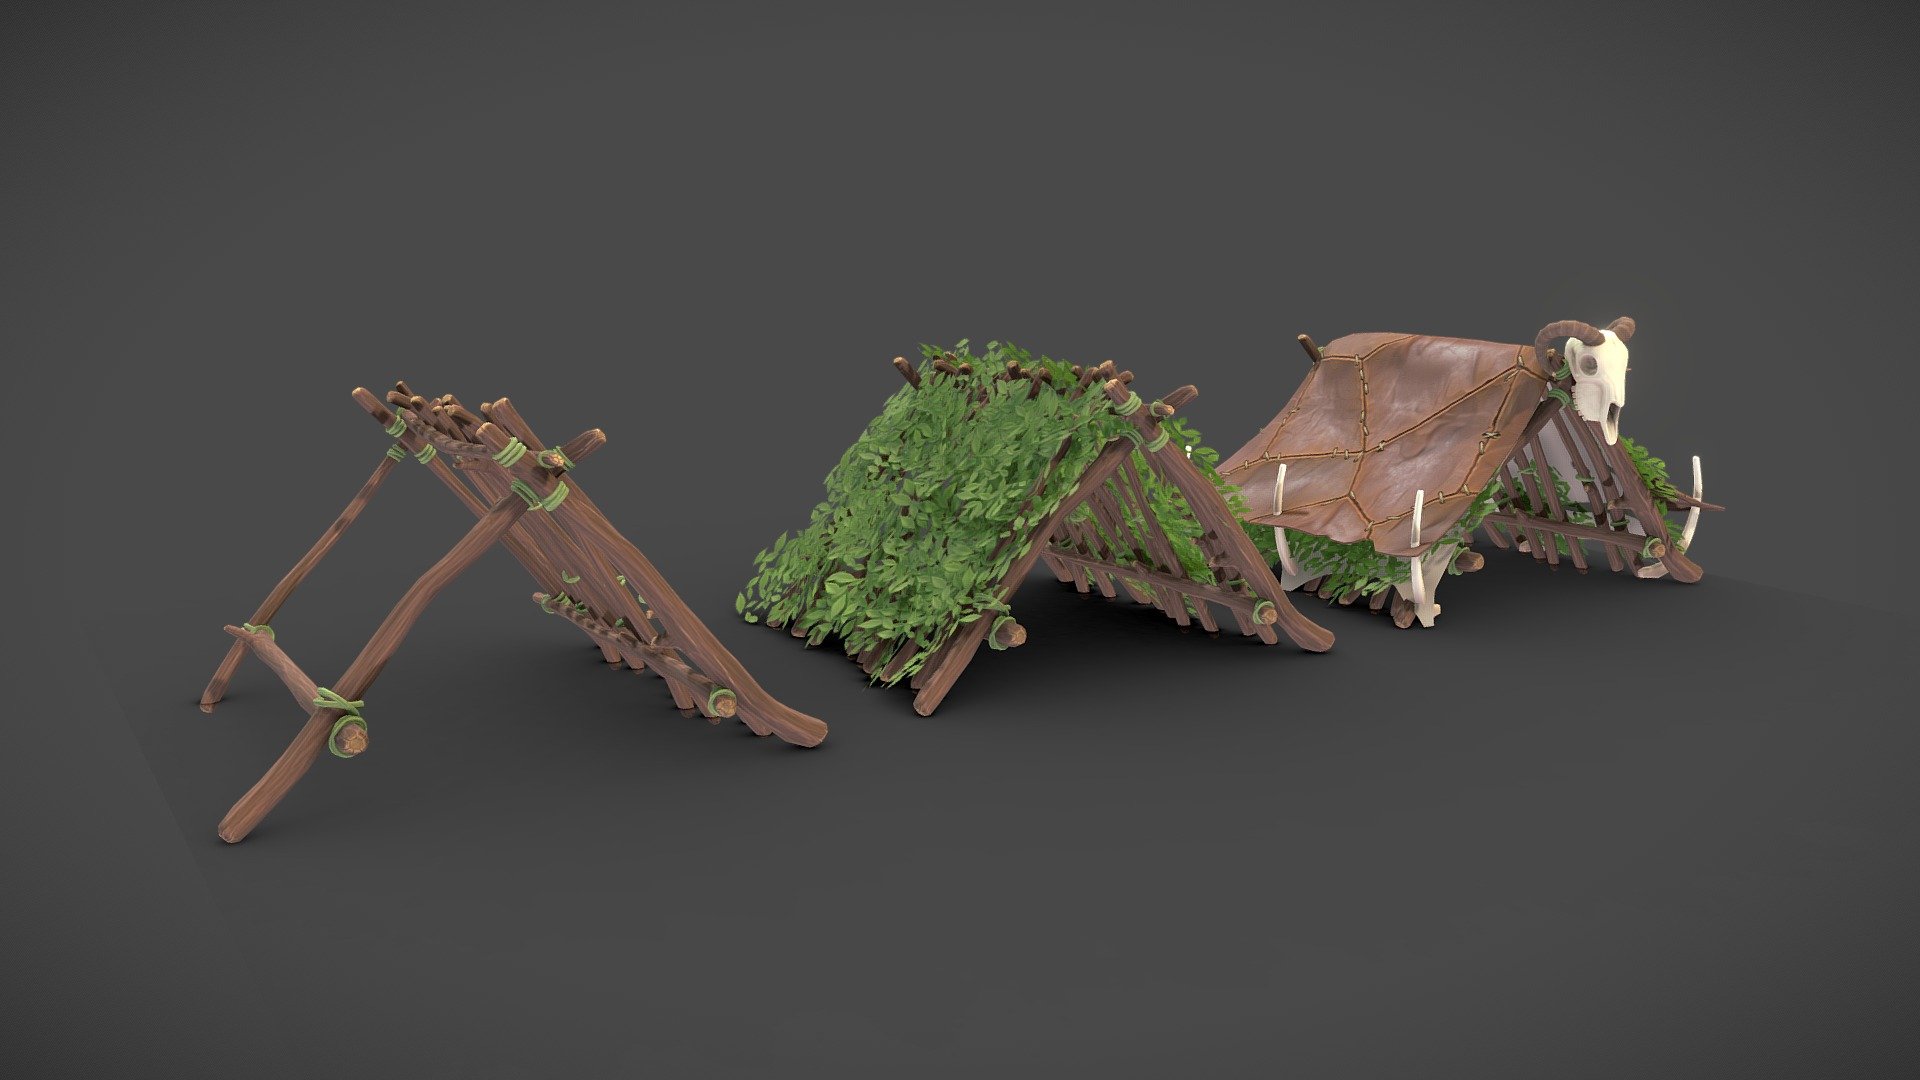 I made this model for a project I was working on with some friends. 

Not my usual style but I am happy with the result - Stylized Caveman Shelter - 3D model by JamesDawson (@JamBoink) 3d model